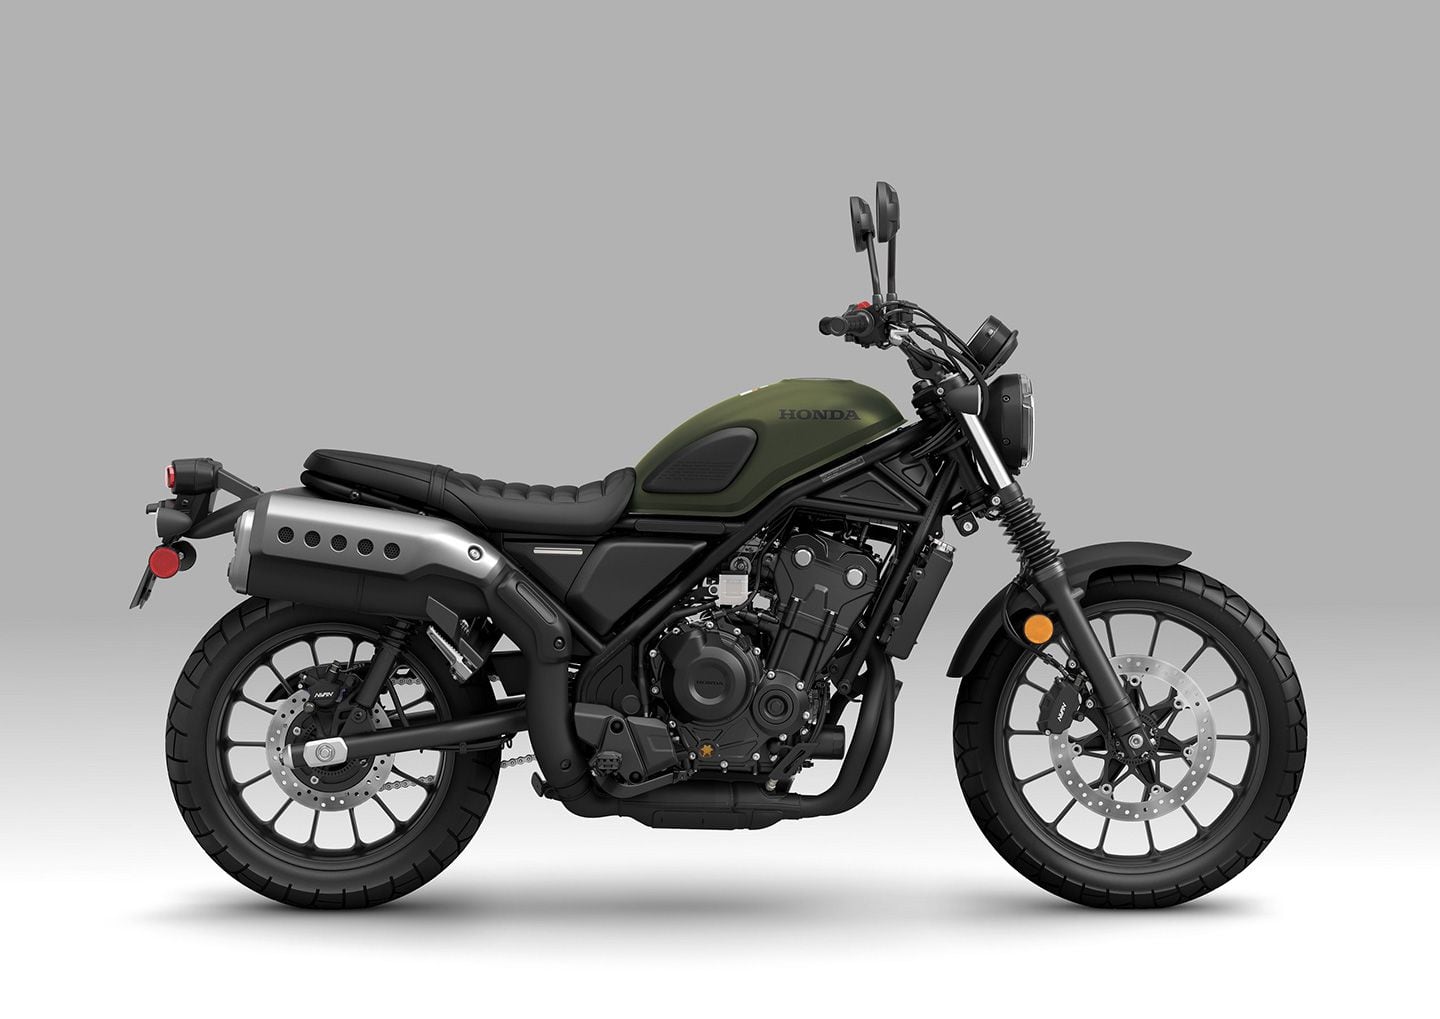 The 2024 SCL500 retains retro cues like tank pads, high-mount exhaust, and retro fork gaiters. Underneath the scrambler styling, though, it shares the 471cc engine and main frame with the Rebel 500.